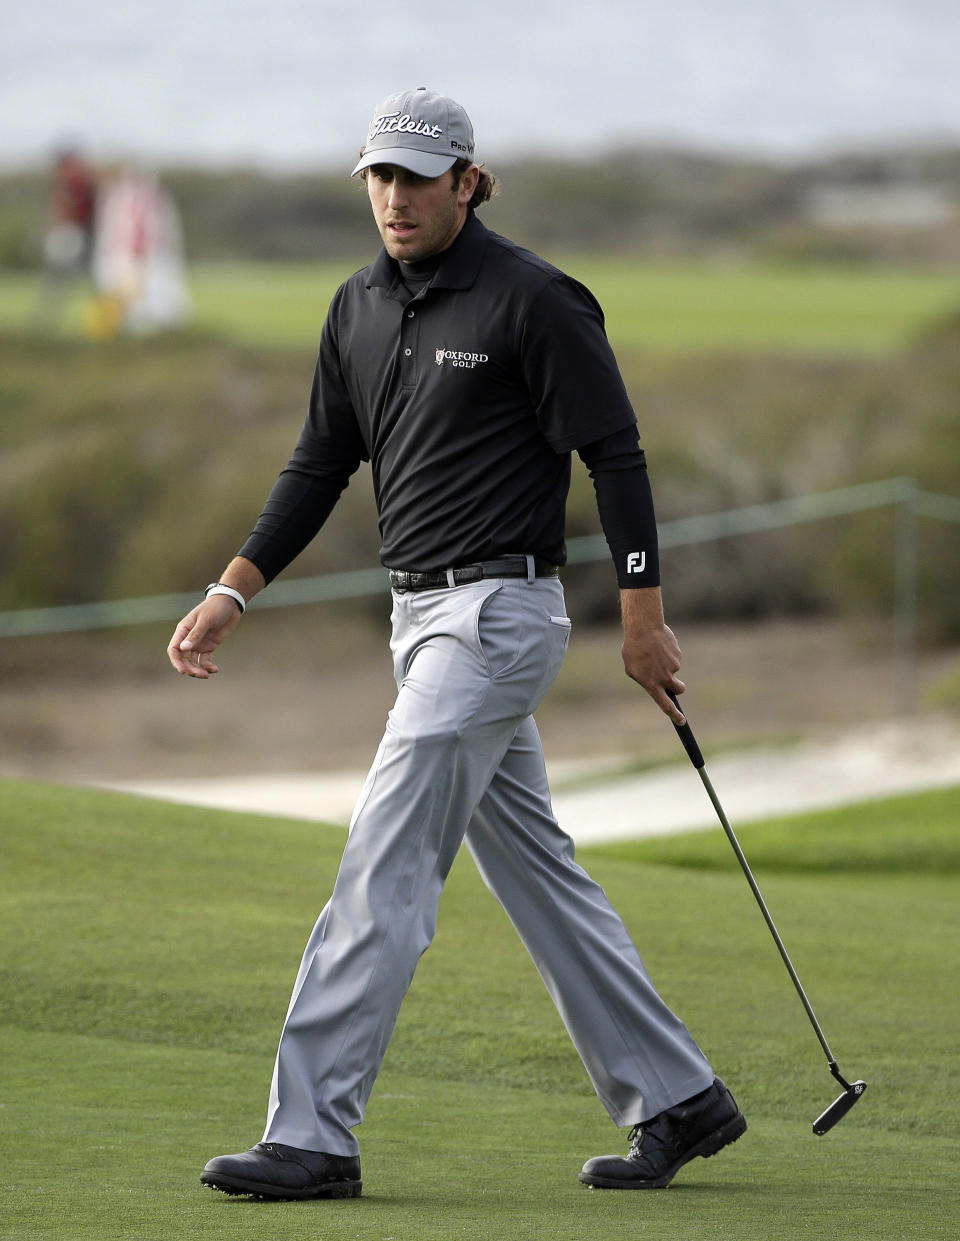 Andrew Loupe walks to retrieve his ball after making a birdie on the 14th green of the Monterey Peninsula Country Club Shore Course during the first round of the AT&T Pebble Beach Pro-Am golf tournament Thursday, Feb. 6, 2014, in Pebble Beach, Calif. (AP Photo/Eric Risberg)